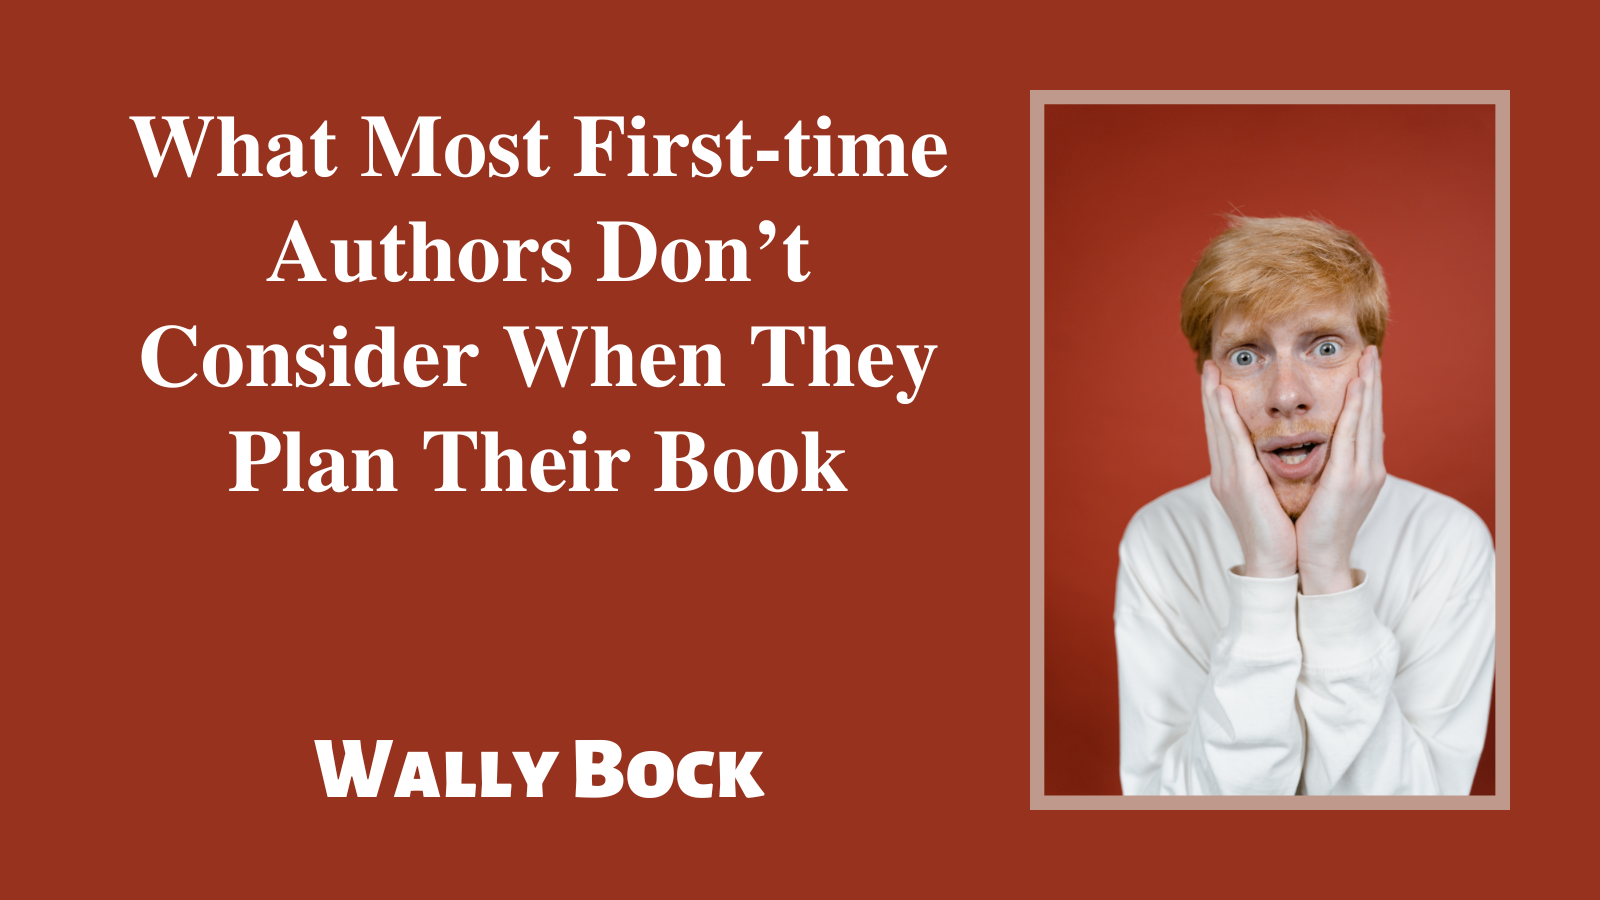 What most first-time authors don’t consider when they plan their book